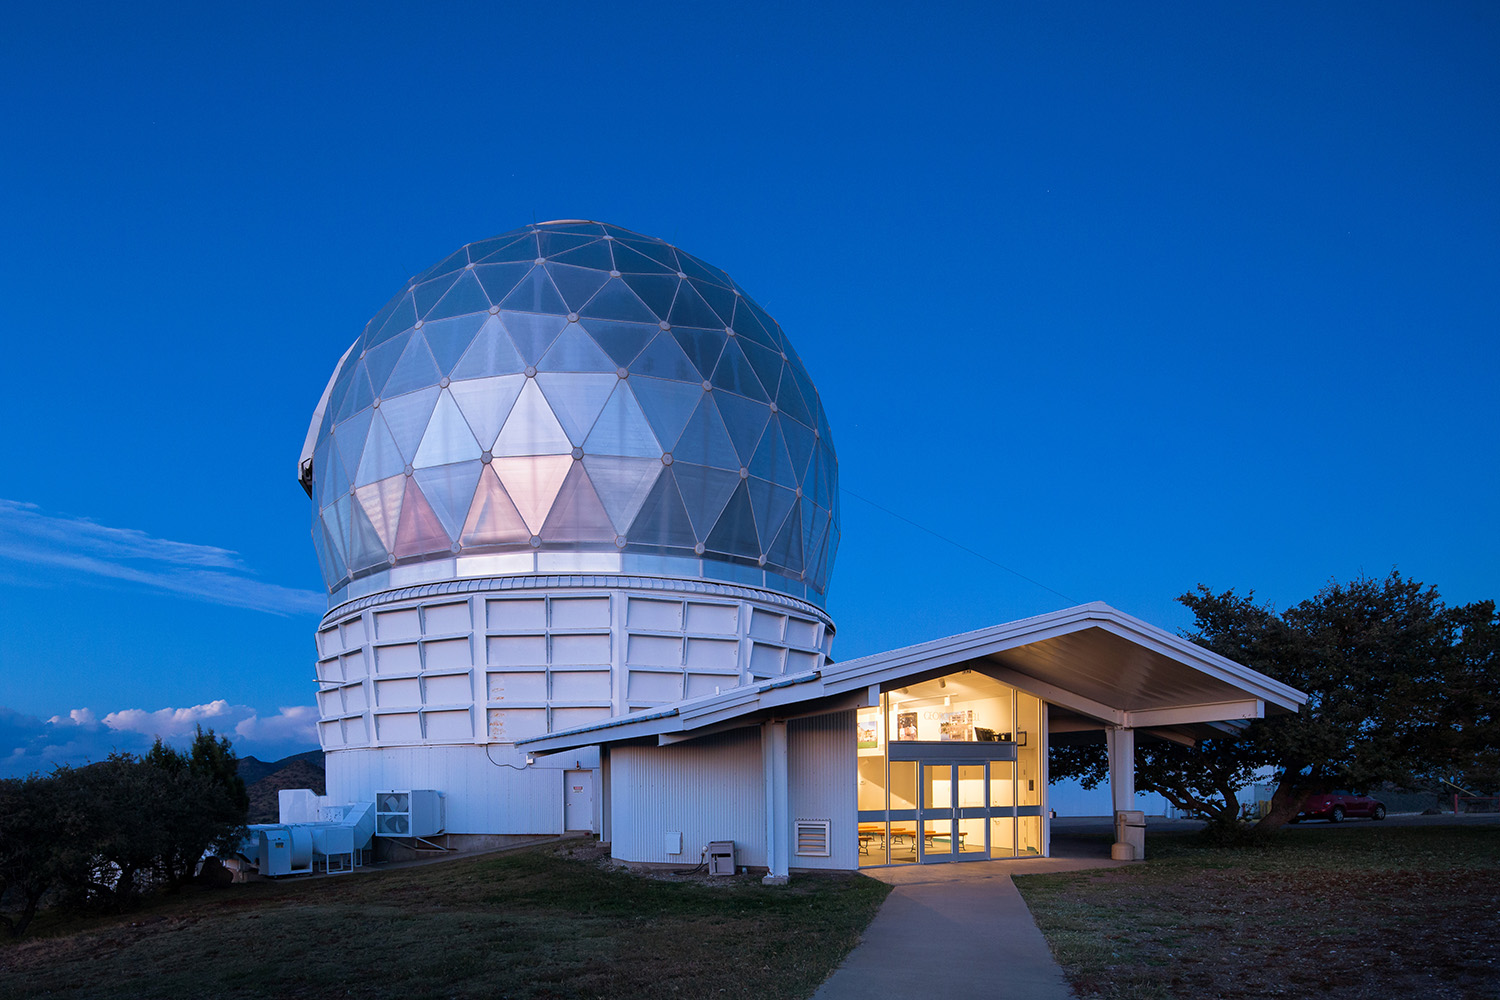 The 10m Hobby-Eberly Telescope at McDonald Observatory in Texas (photo by Ethan Tweedie Photography). 